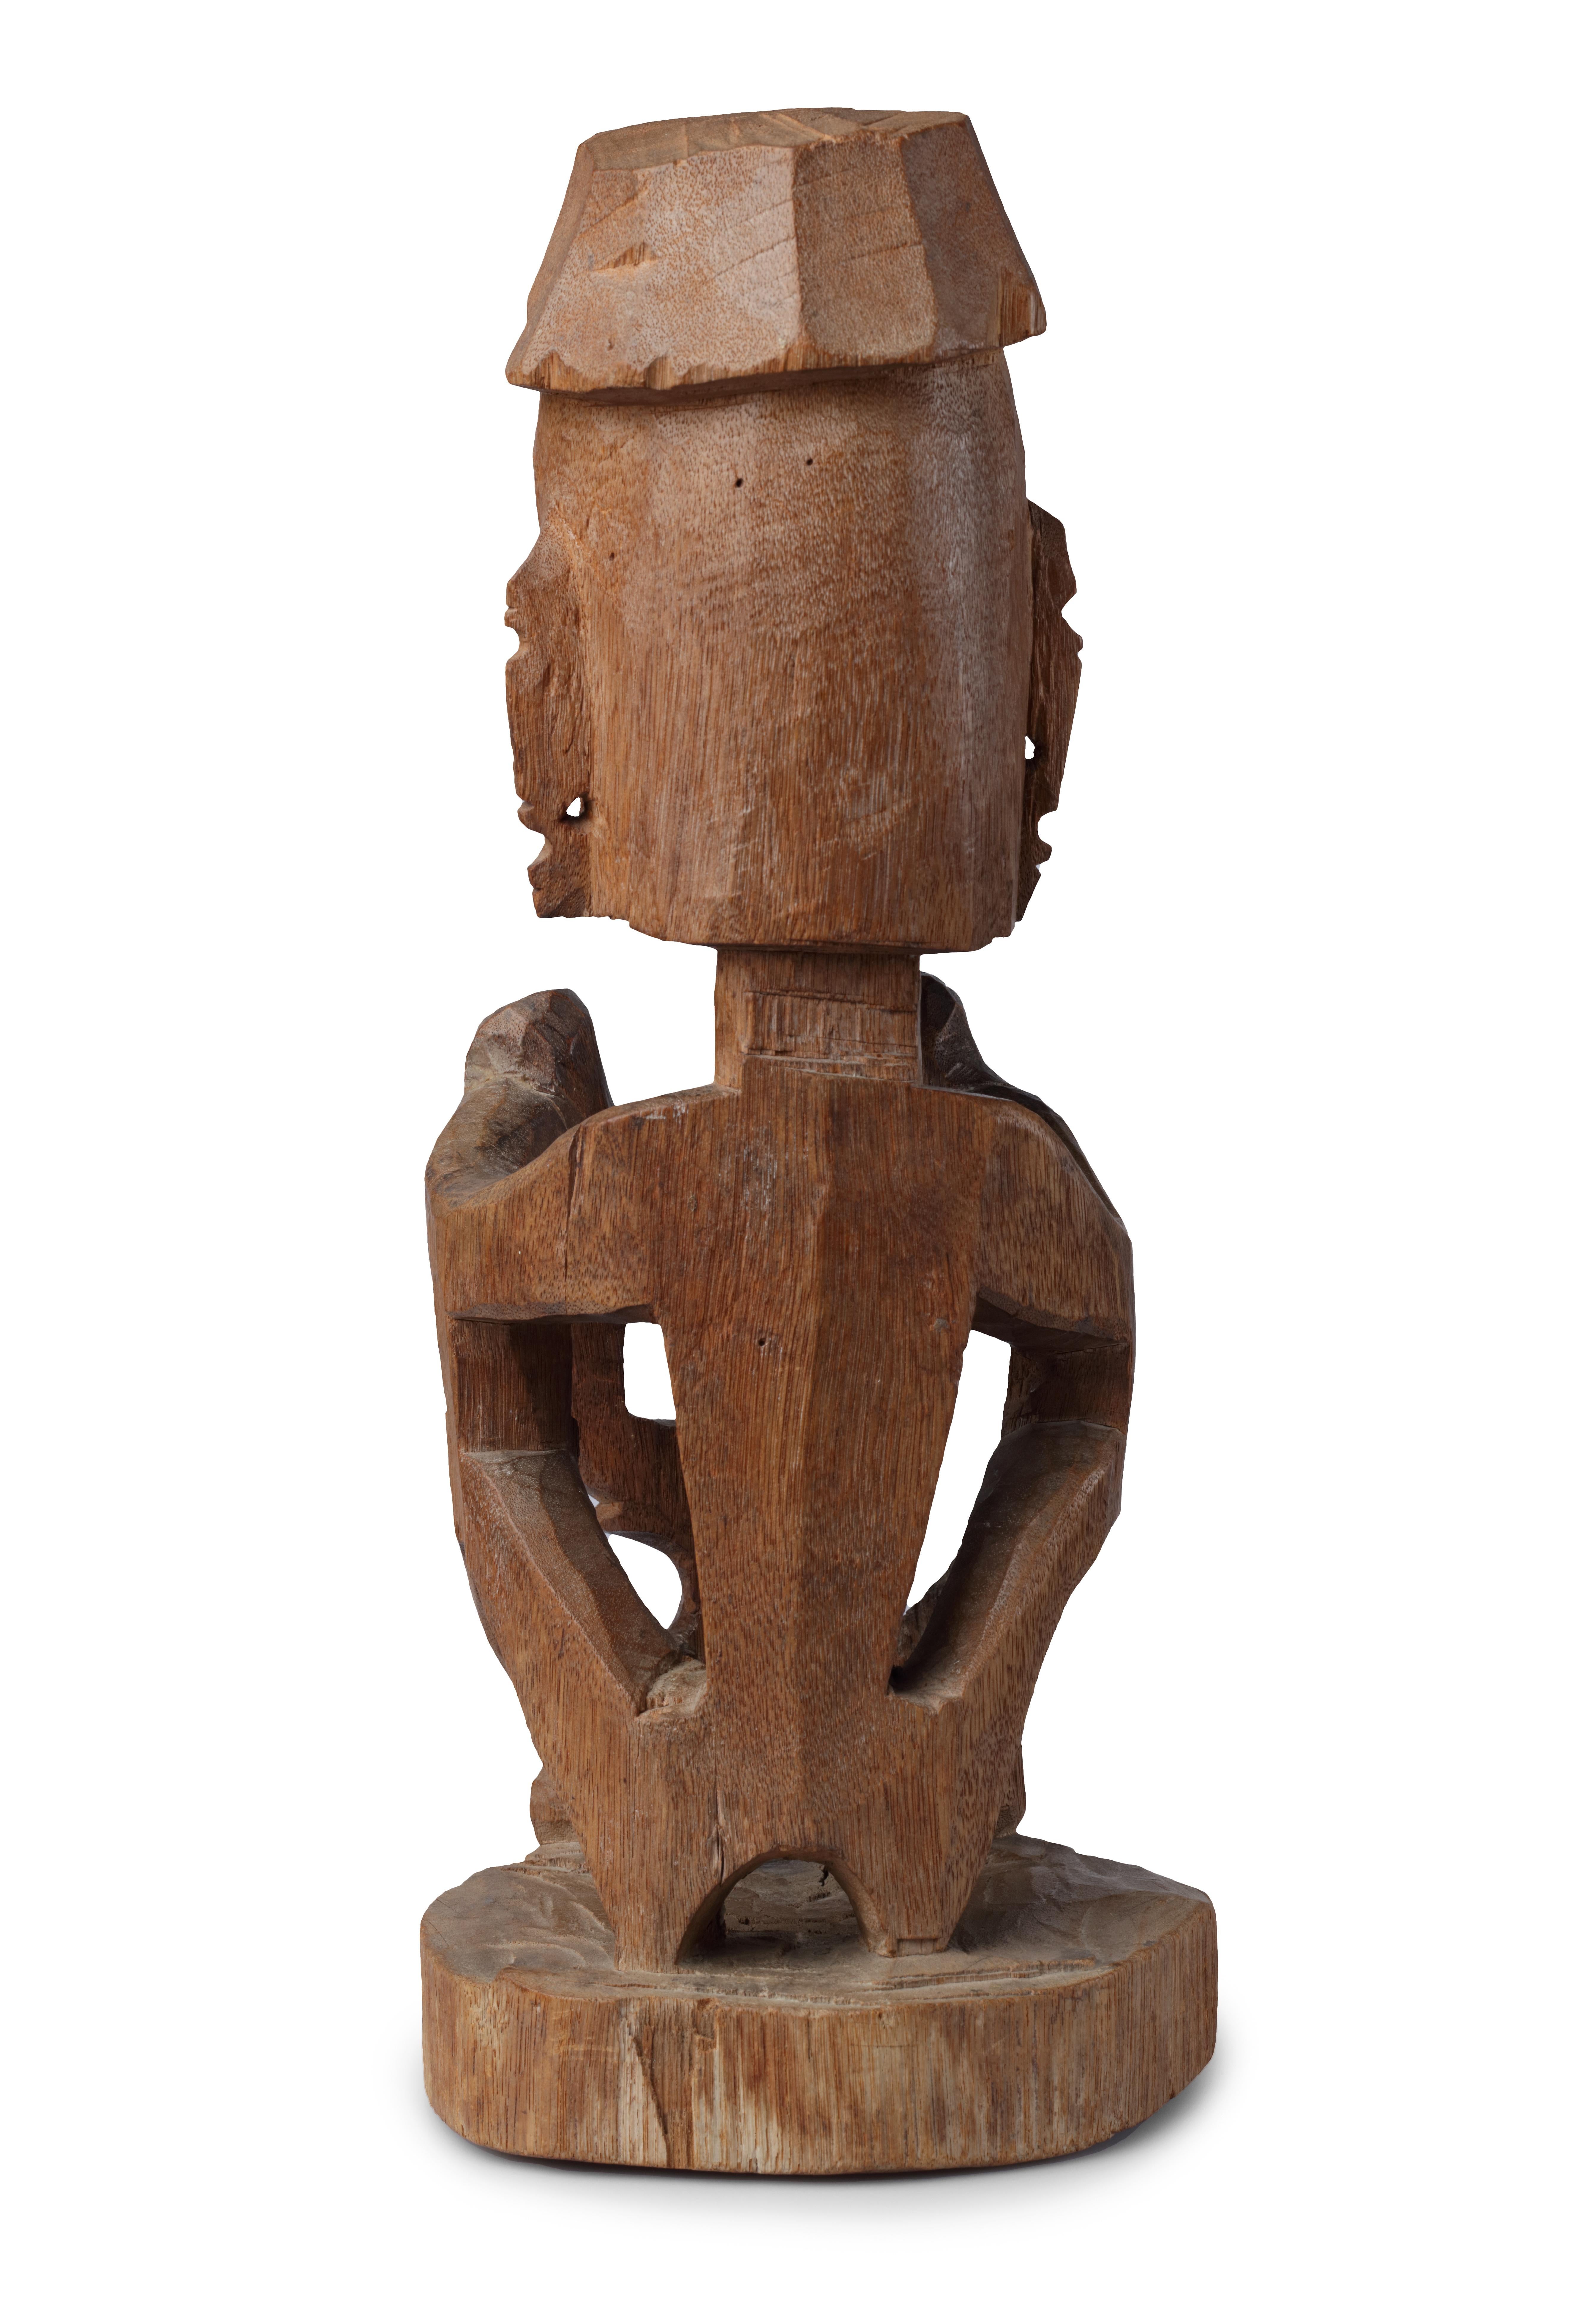 Tribal Early Papua Korwar Statue, Collection of Missionary Starrenburg, Collected 1909 For Sale